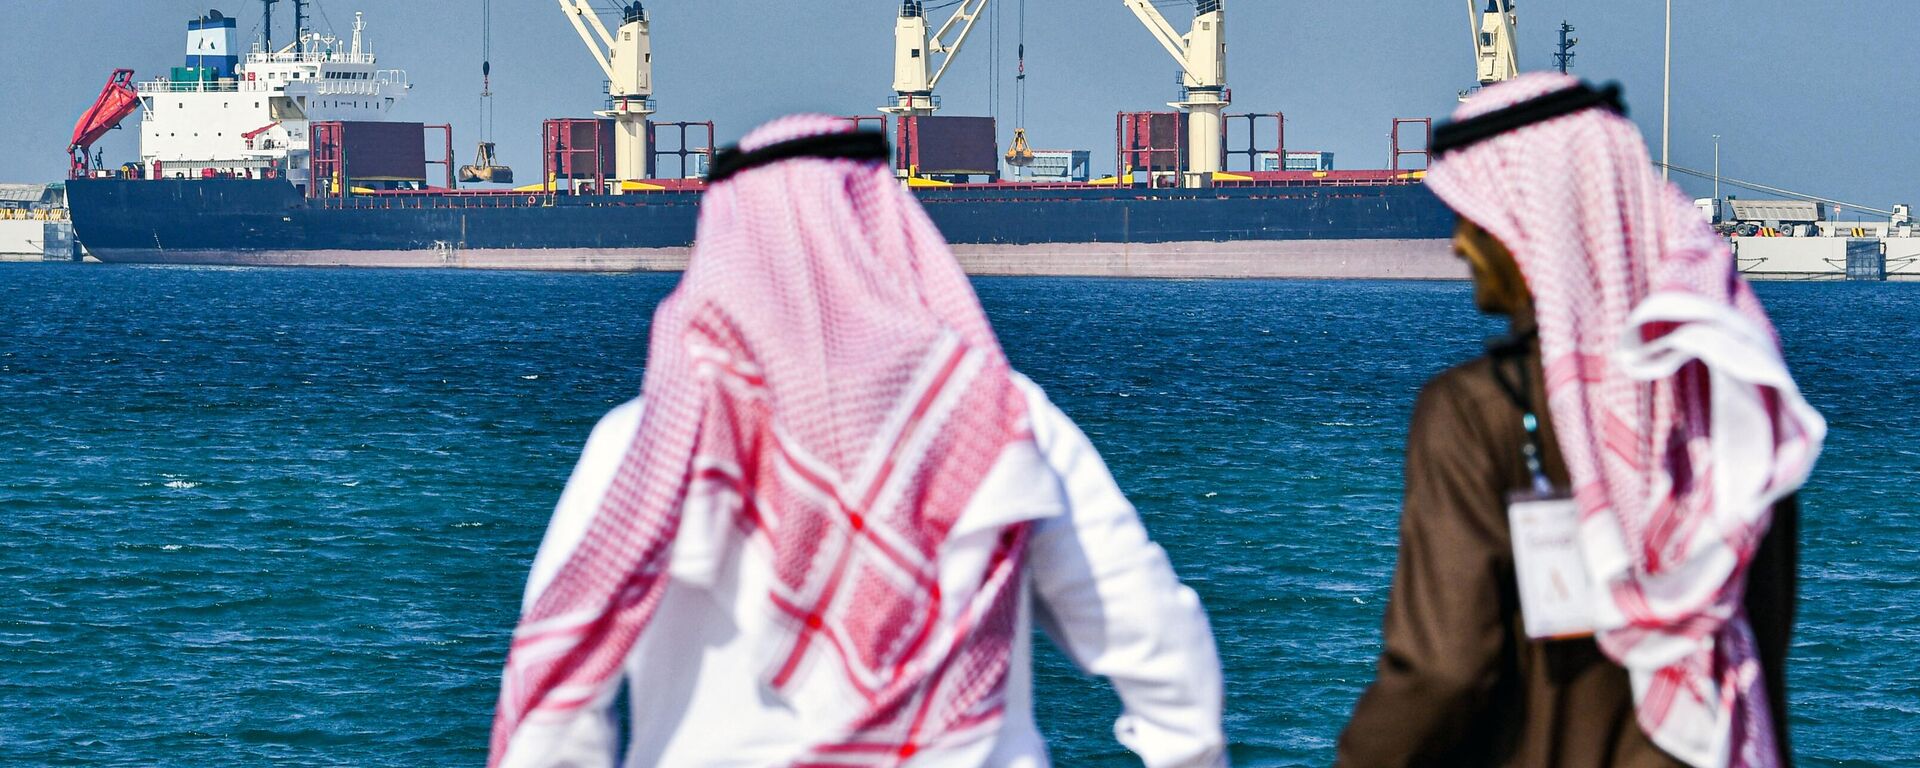 This picture taken on December 11, 2019, shows an oil tanker at the port of Ras al-Khair, about 185 kilometres north of Dammam in Saudi Arabia's eastern province overlooking the Gulf. (Photo by GIUSEPPE CACACE / AFP) - Sputnik International, 1920, 24.07.2022